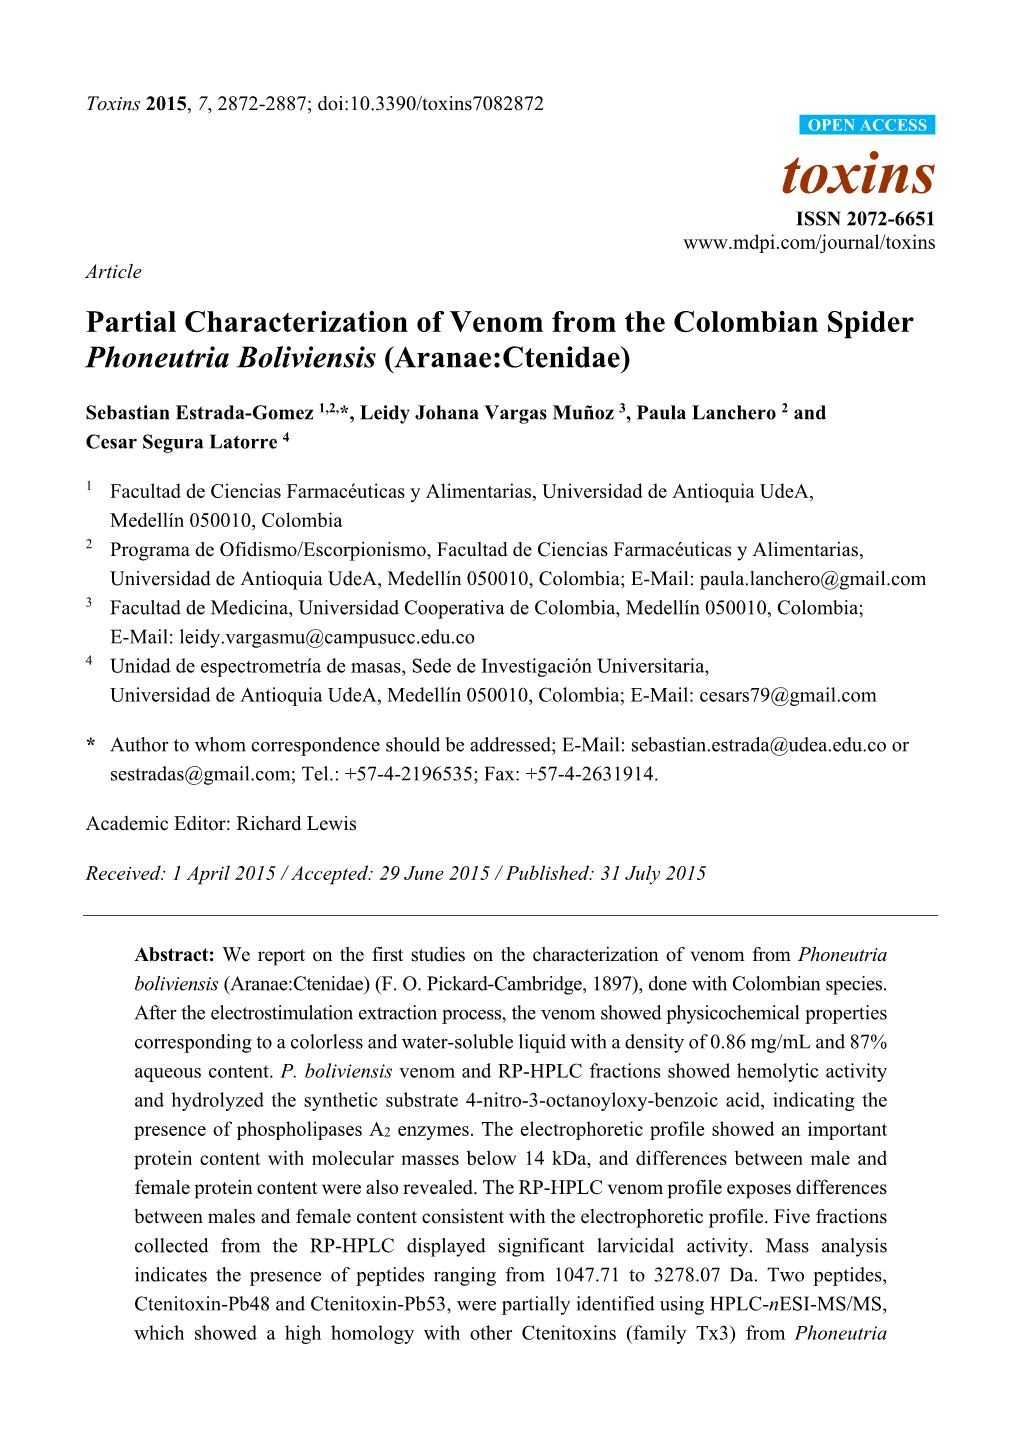 Partial Characterization of Venom from the Colombian Spider Phoneutria Boliviensis (Aranae:Ctenidae)